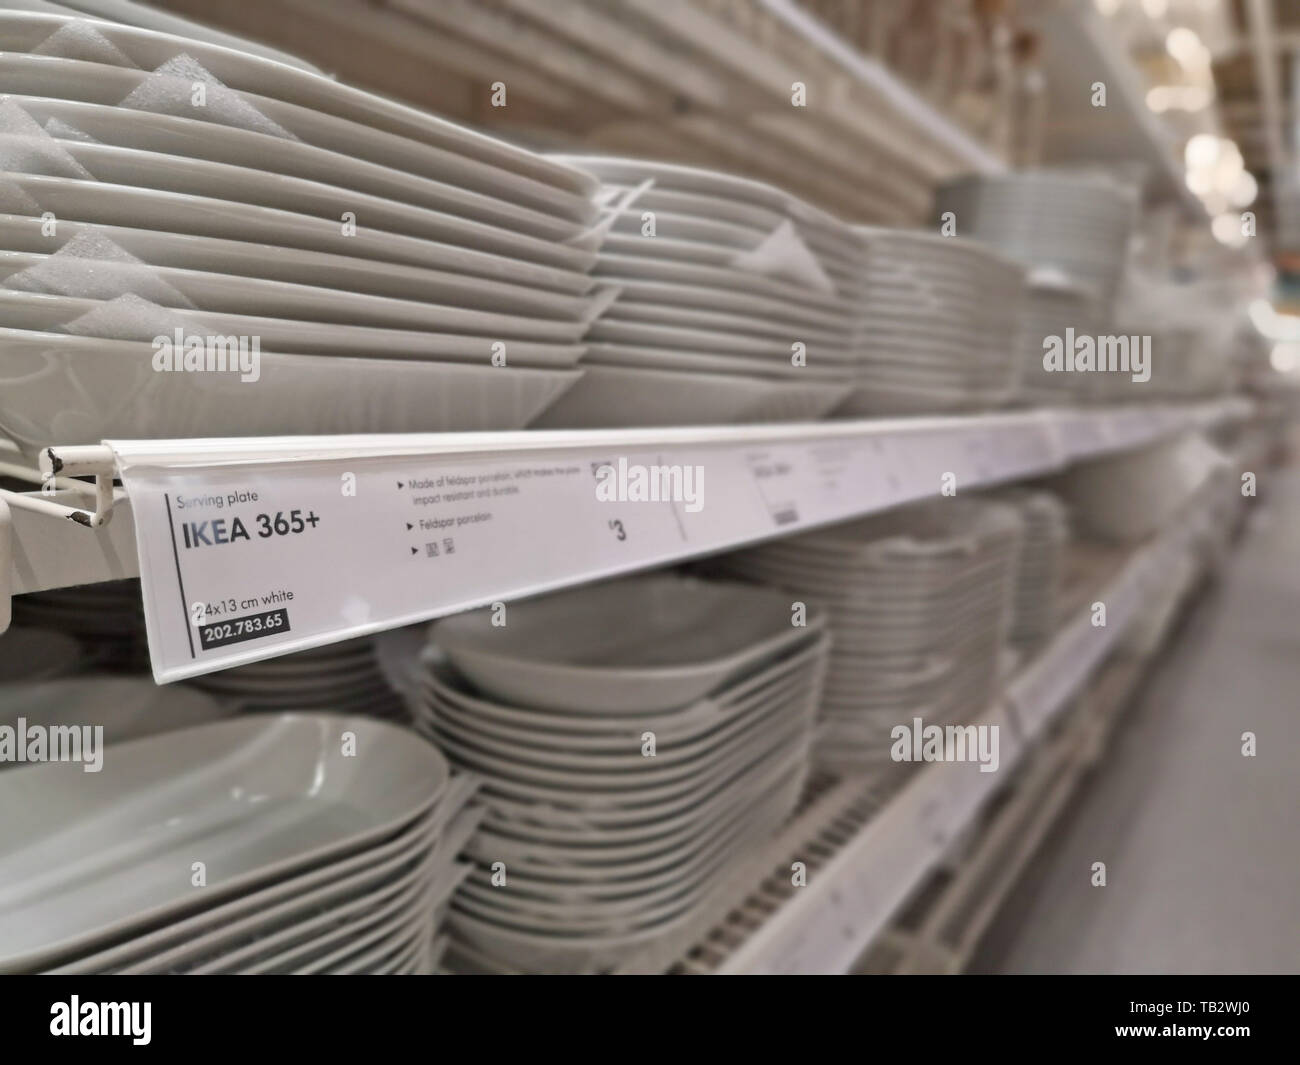 Market Hall at Ikea in Coventry, UK, on May 29, 2019. Stock Photo